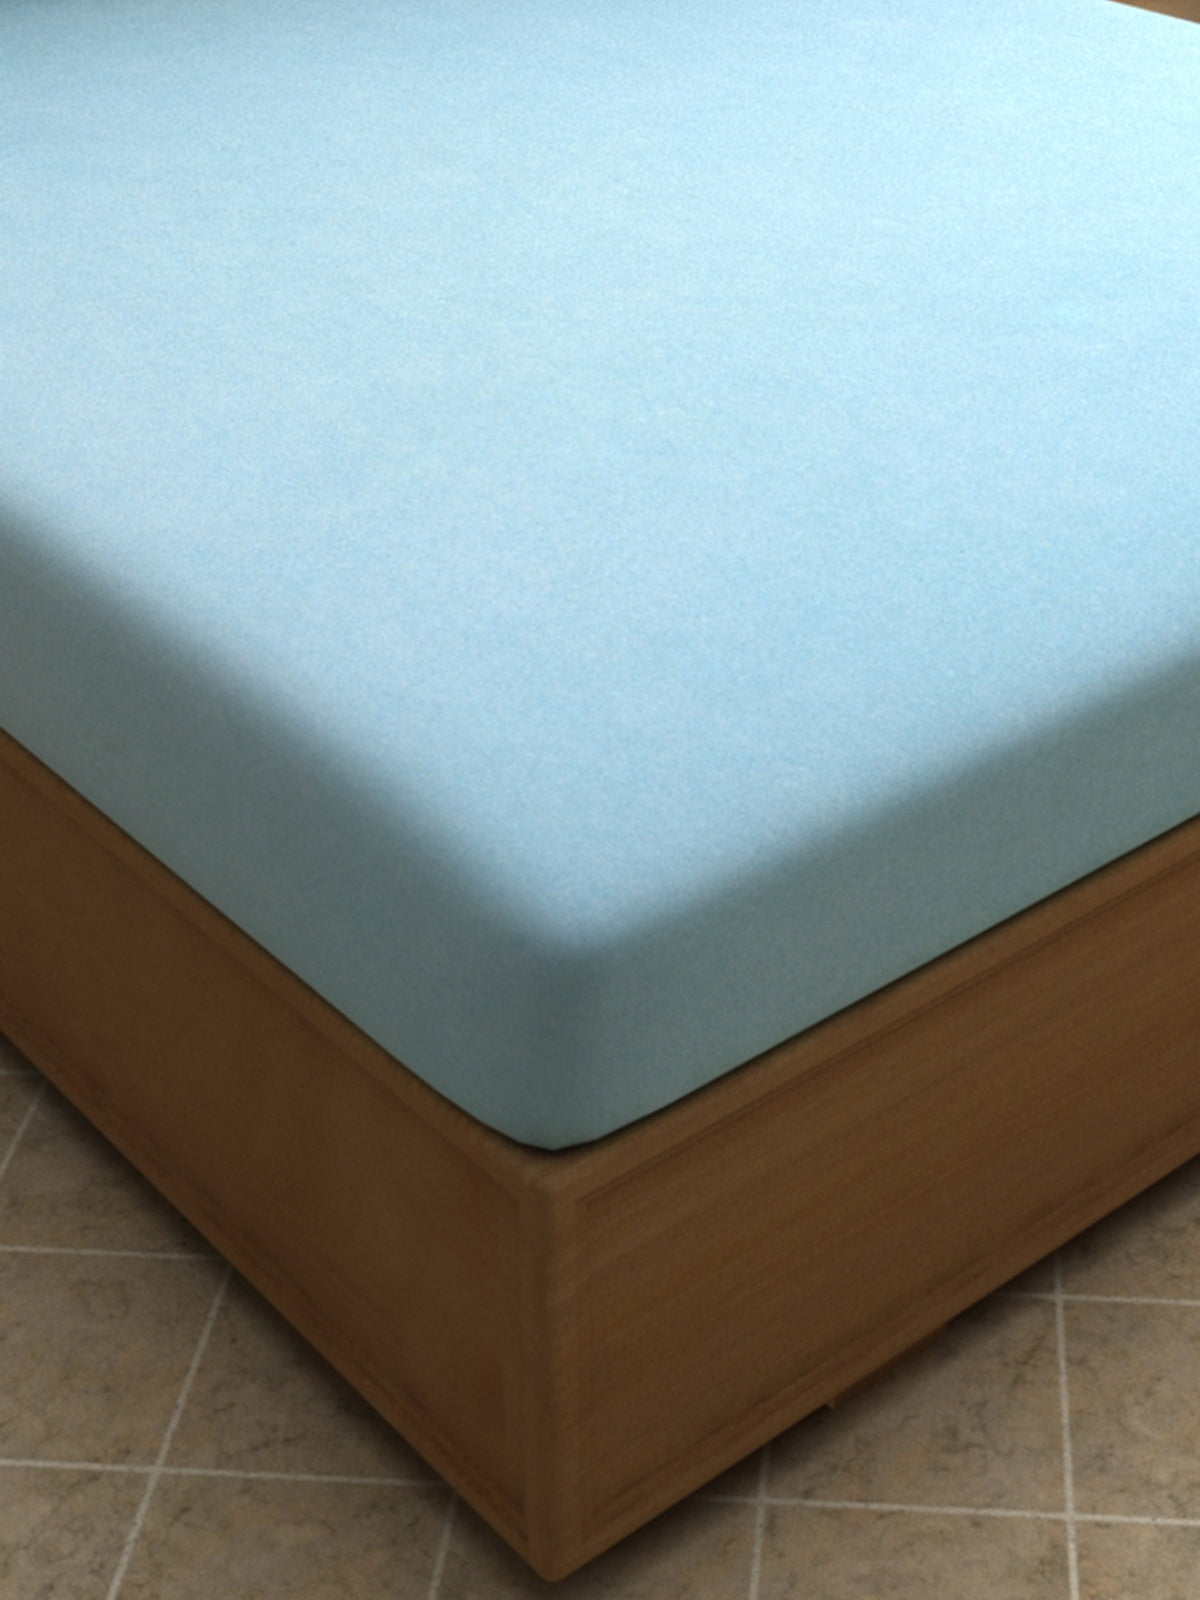 Aqua Blue Terry Cloth Waterproof Mattress Protector for King Size